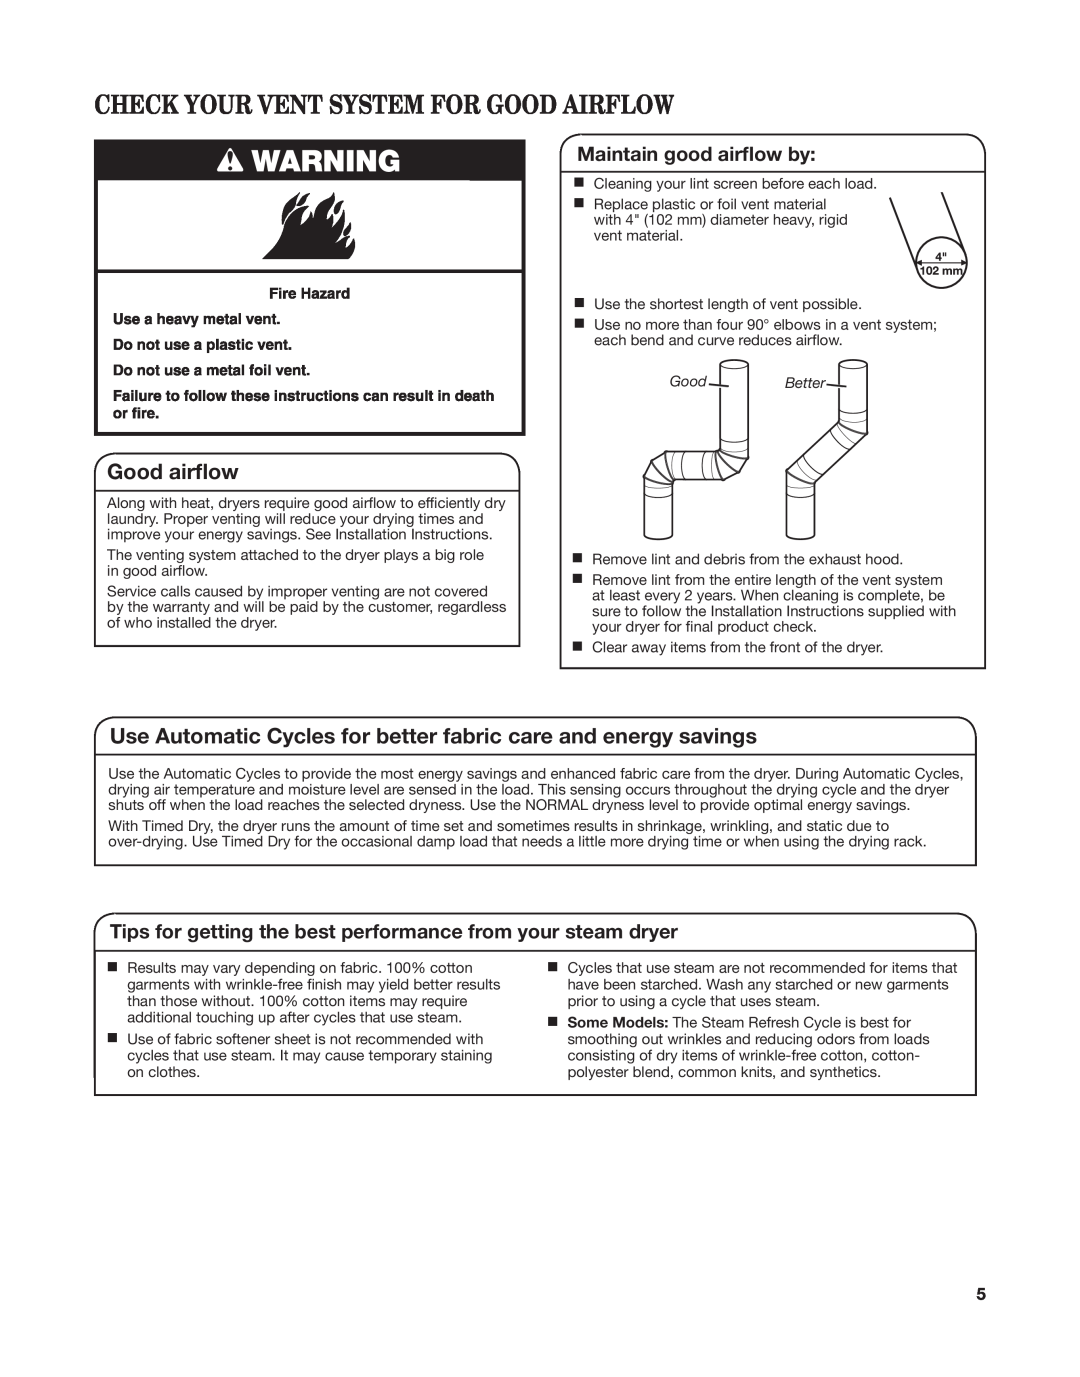 Whirlpool W10529641A manual Check Your Vent System For Good Airflow, Good airflow, Maintain good airflow by, GoodBetter 